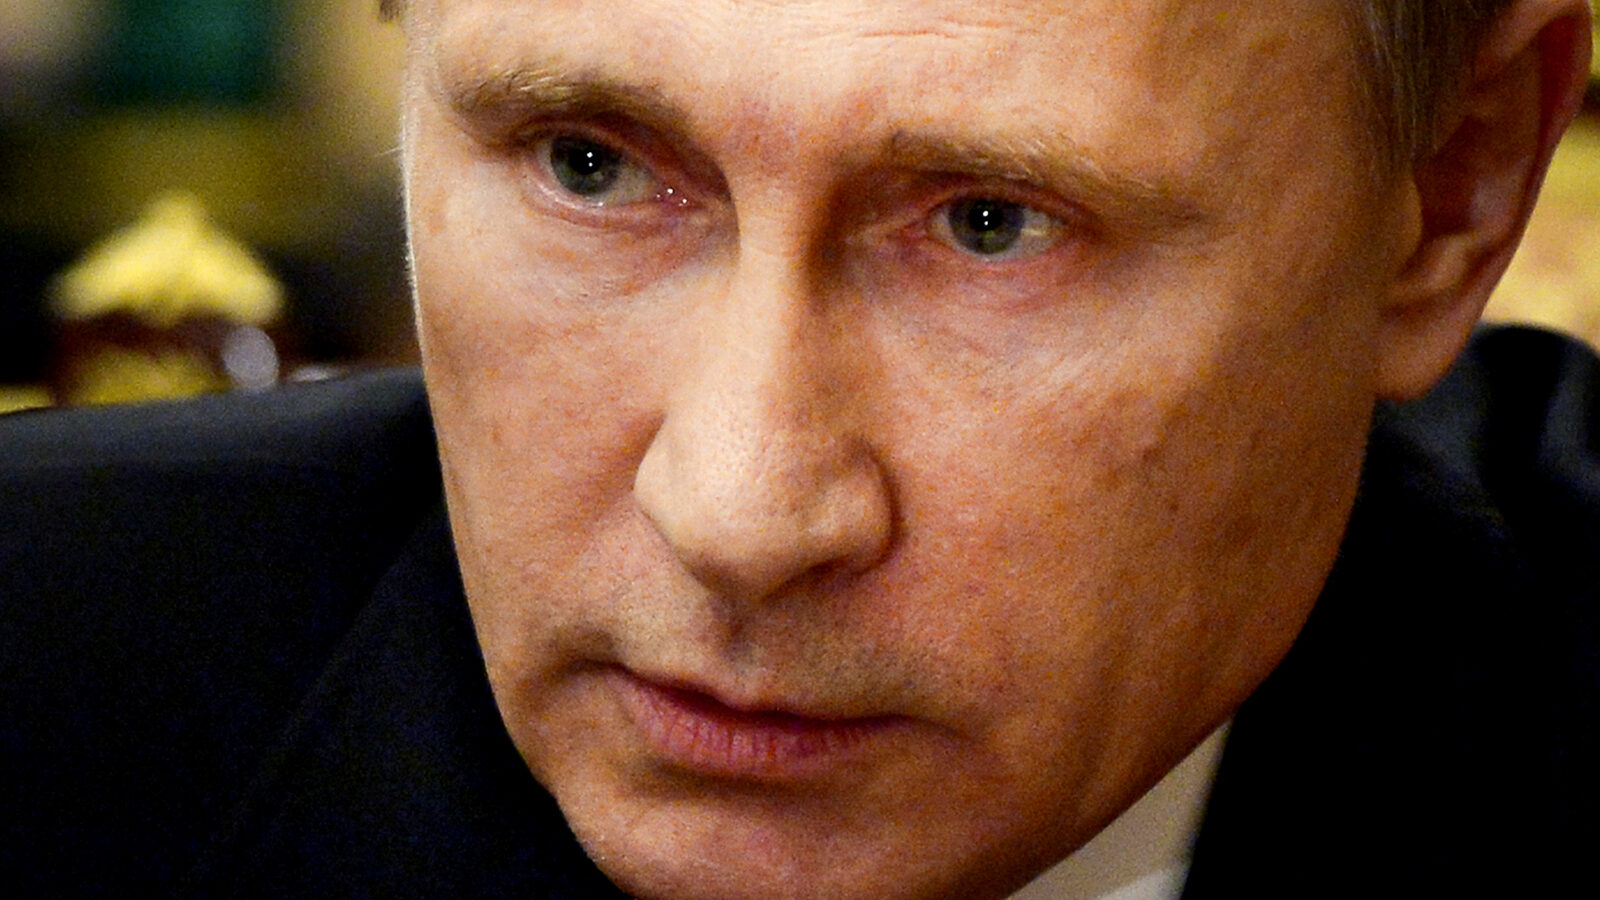 Russian President Vladimir Putin speaks as he heads a meeting on the Russian plane crash in Egypt, in Moscow's Kremlin, Russia, early Tuesday, Nov. 17, 2015. The head of Russia's FSB security service says the crash of the passenger plane in Egypt was the result of a 'terrorist' act. Alexander Bortnikov told Putin on Tuesday that a homemade explosive device blew up on the plane. All 224 people on board the plane, most of them Russian tourists, were killed in the Oct. 31 crash. (Alexei Nikolsky/SPUTNIK, Kremlin Pool Photo via AP)